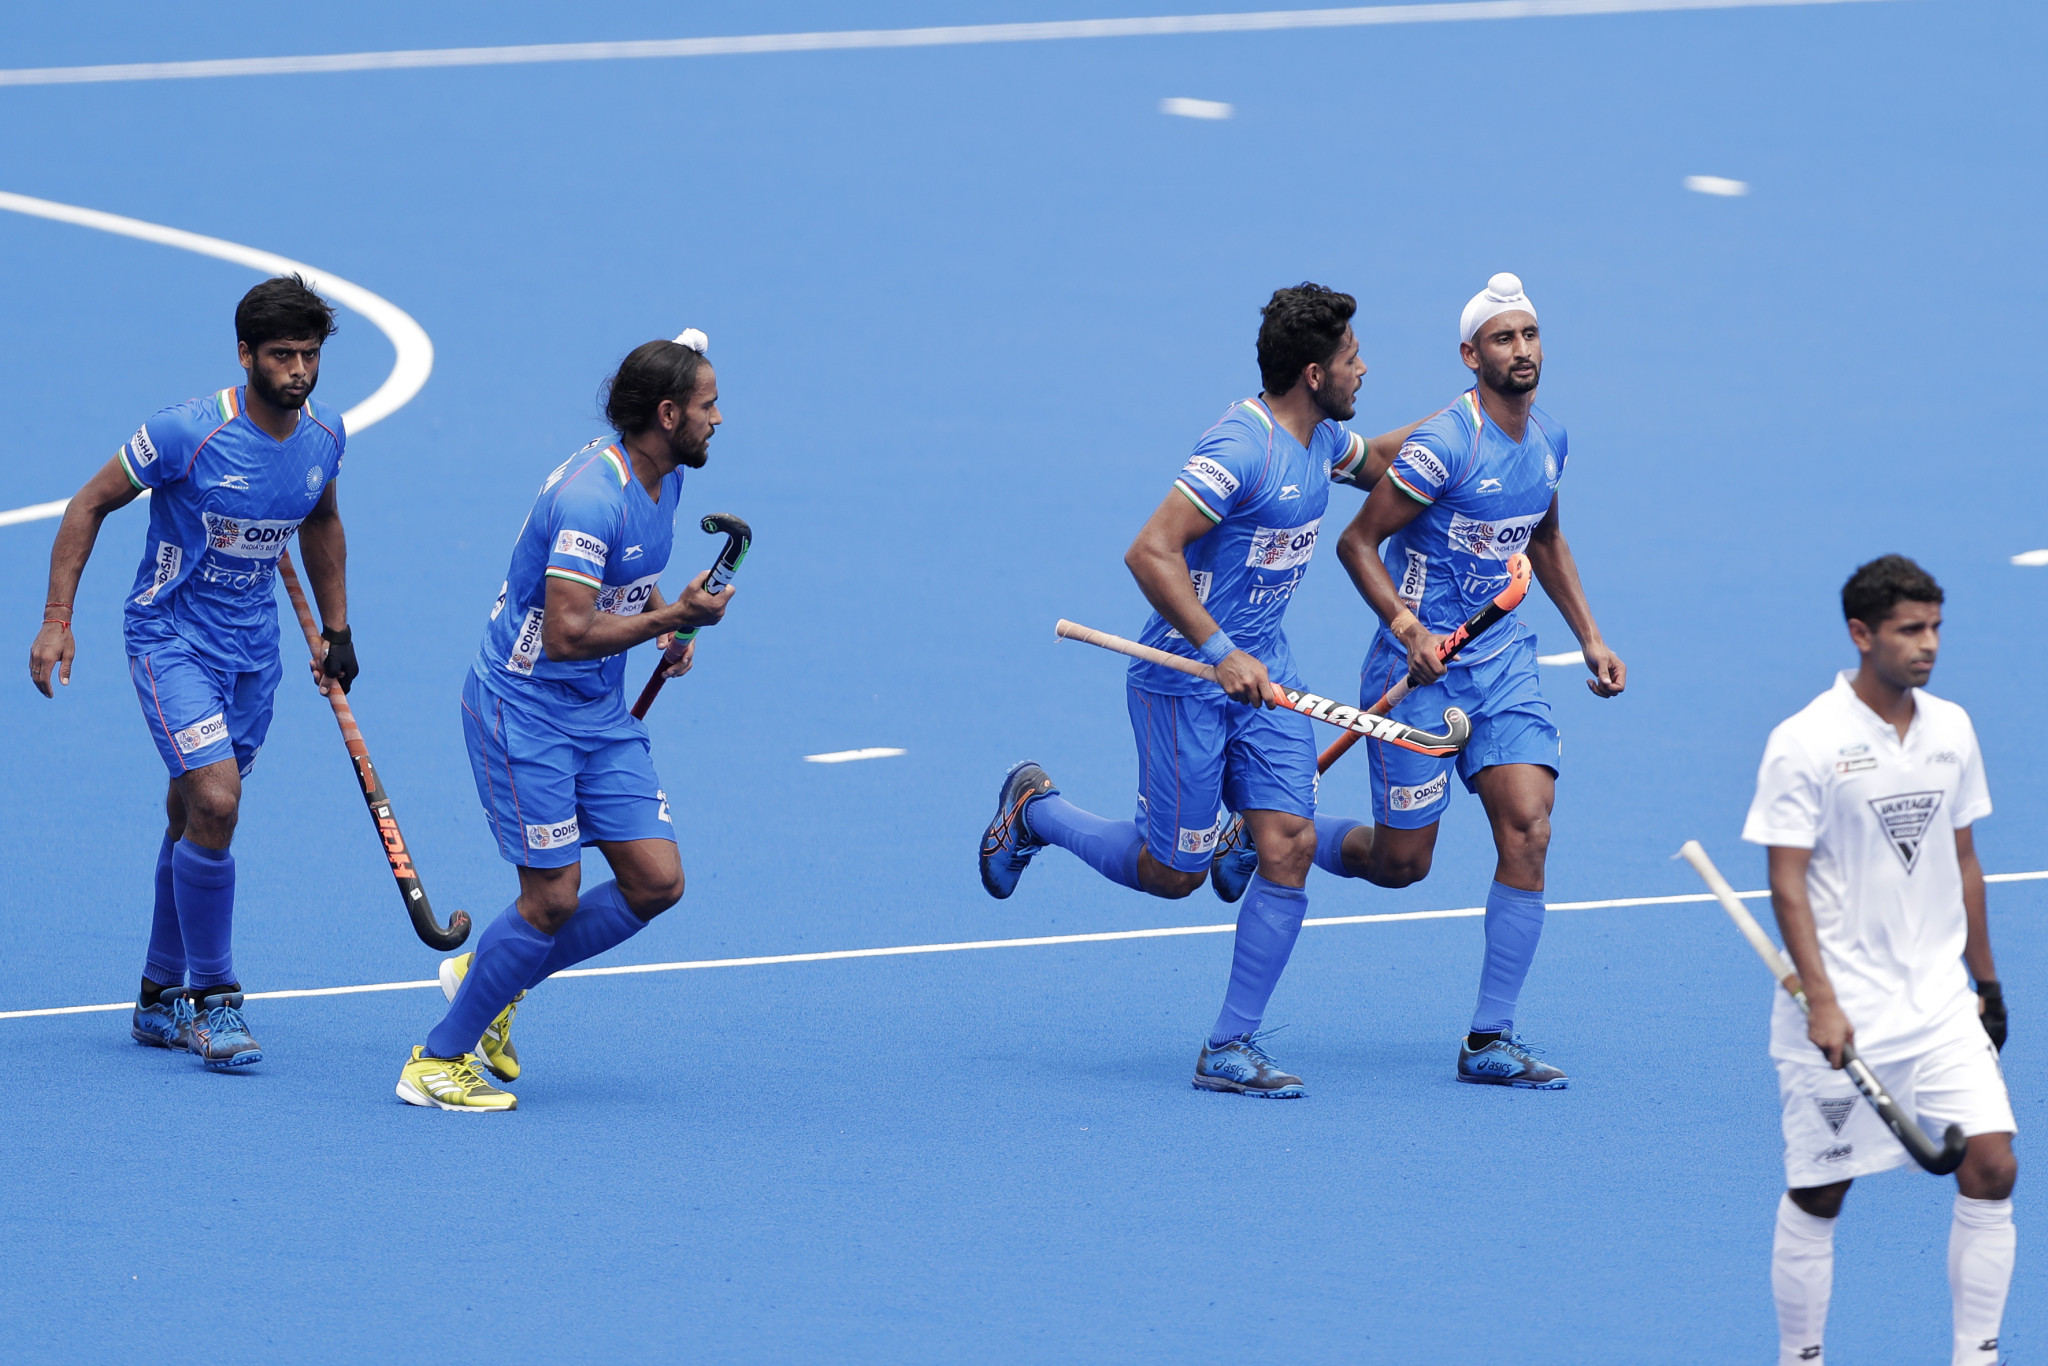 FIH dismiss idea of Olympic qualifier between India and Pakistan in Europe